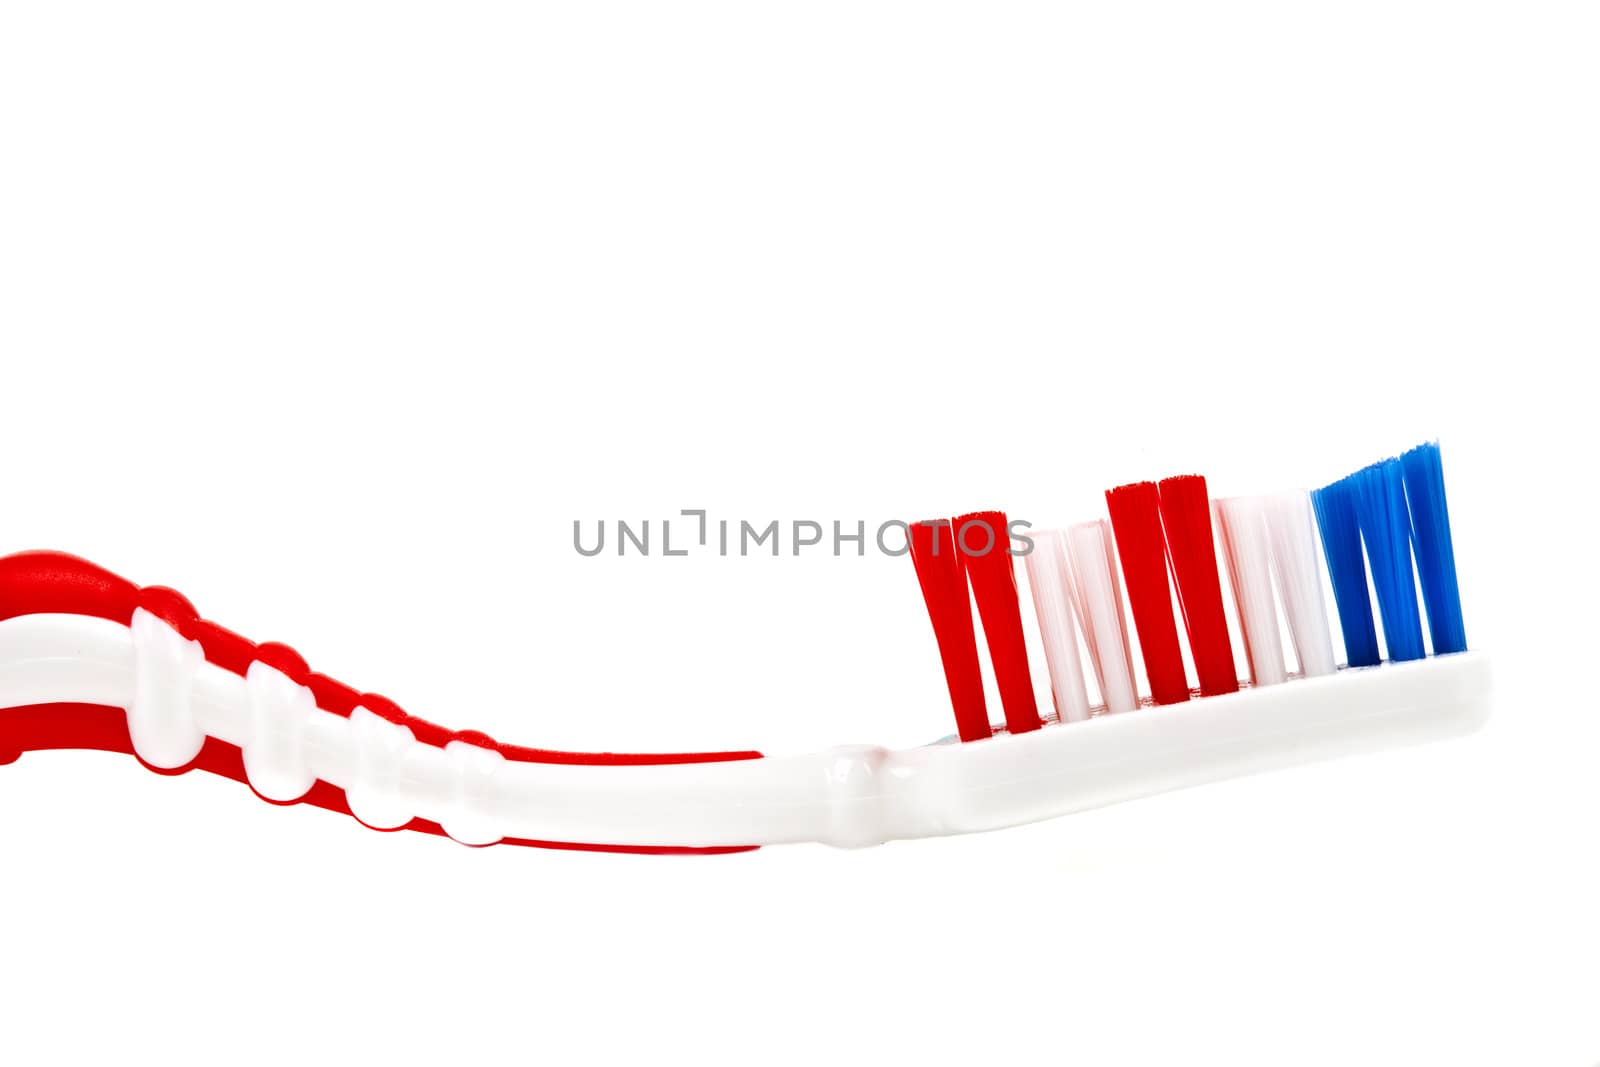 Close-up of a Toothbrush over a white background.